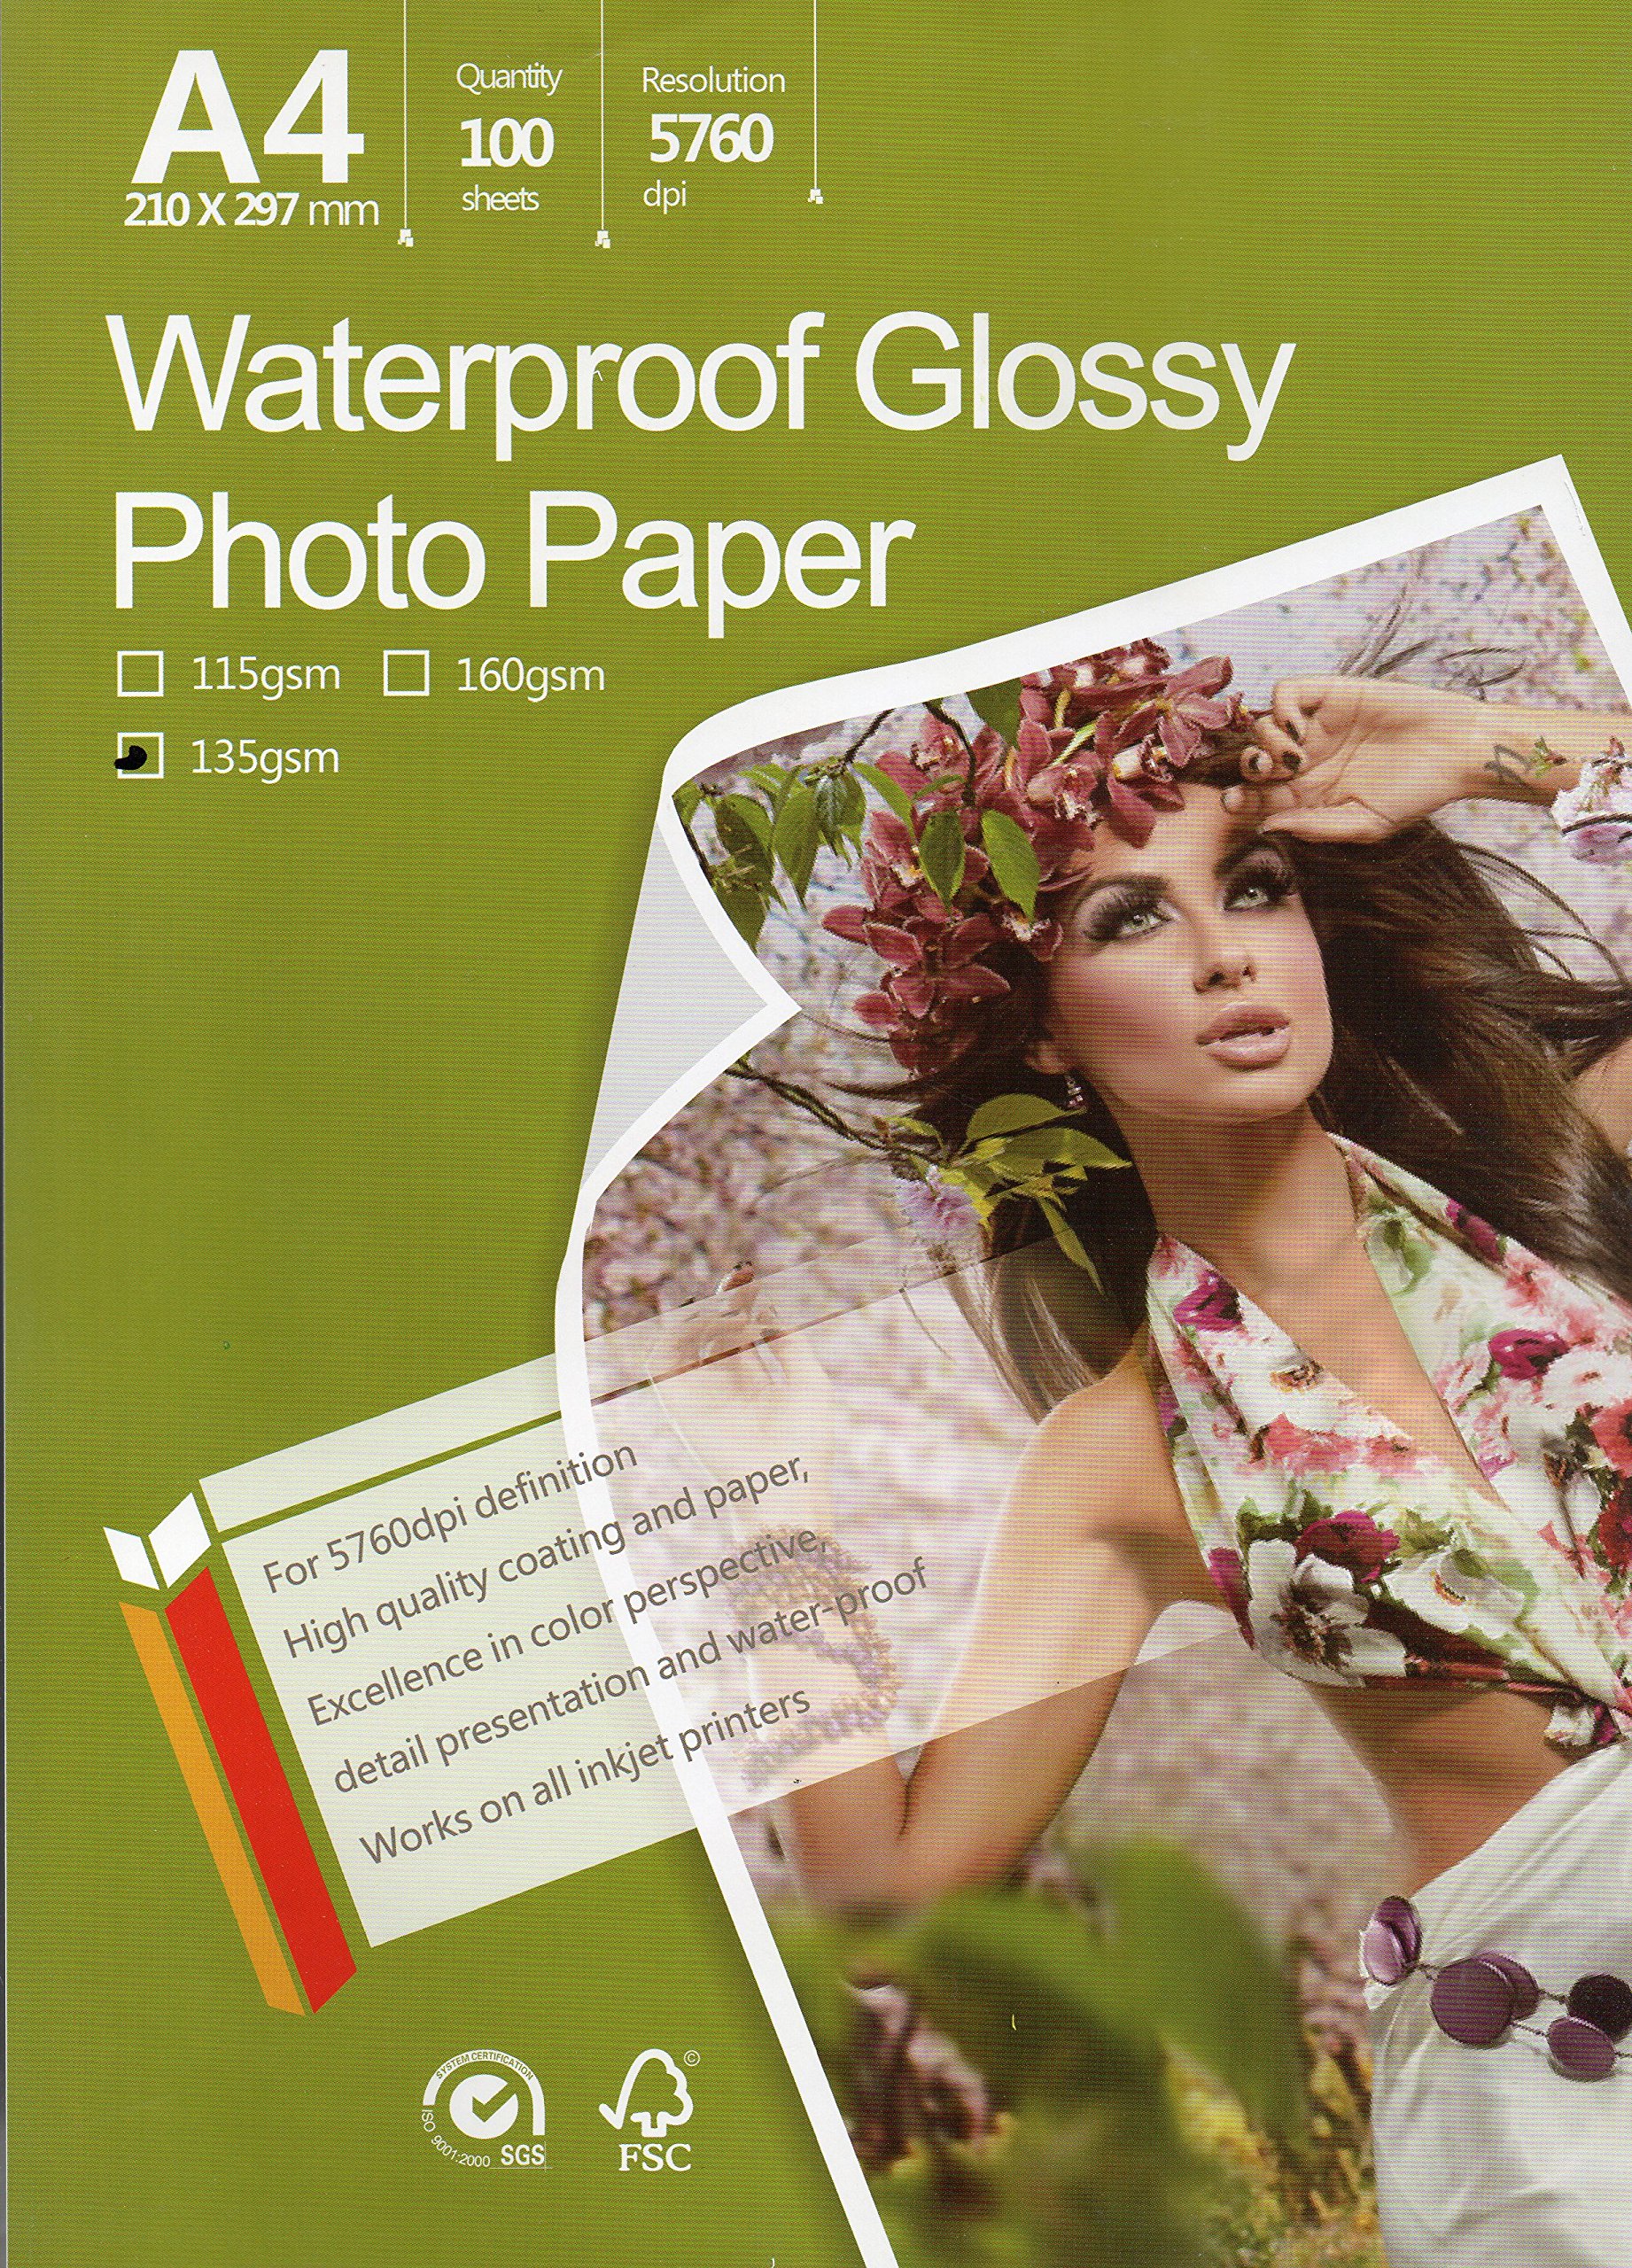 Printed image on high-quality glossy photo paper